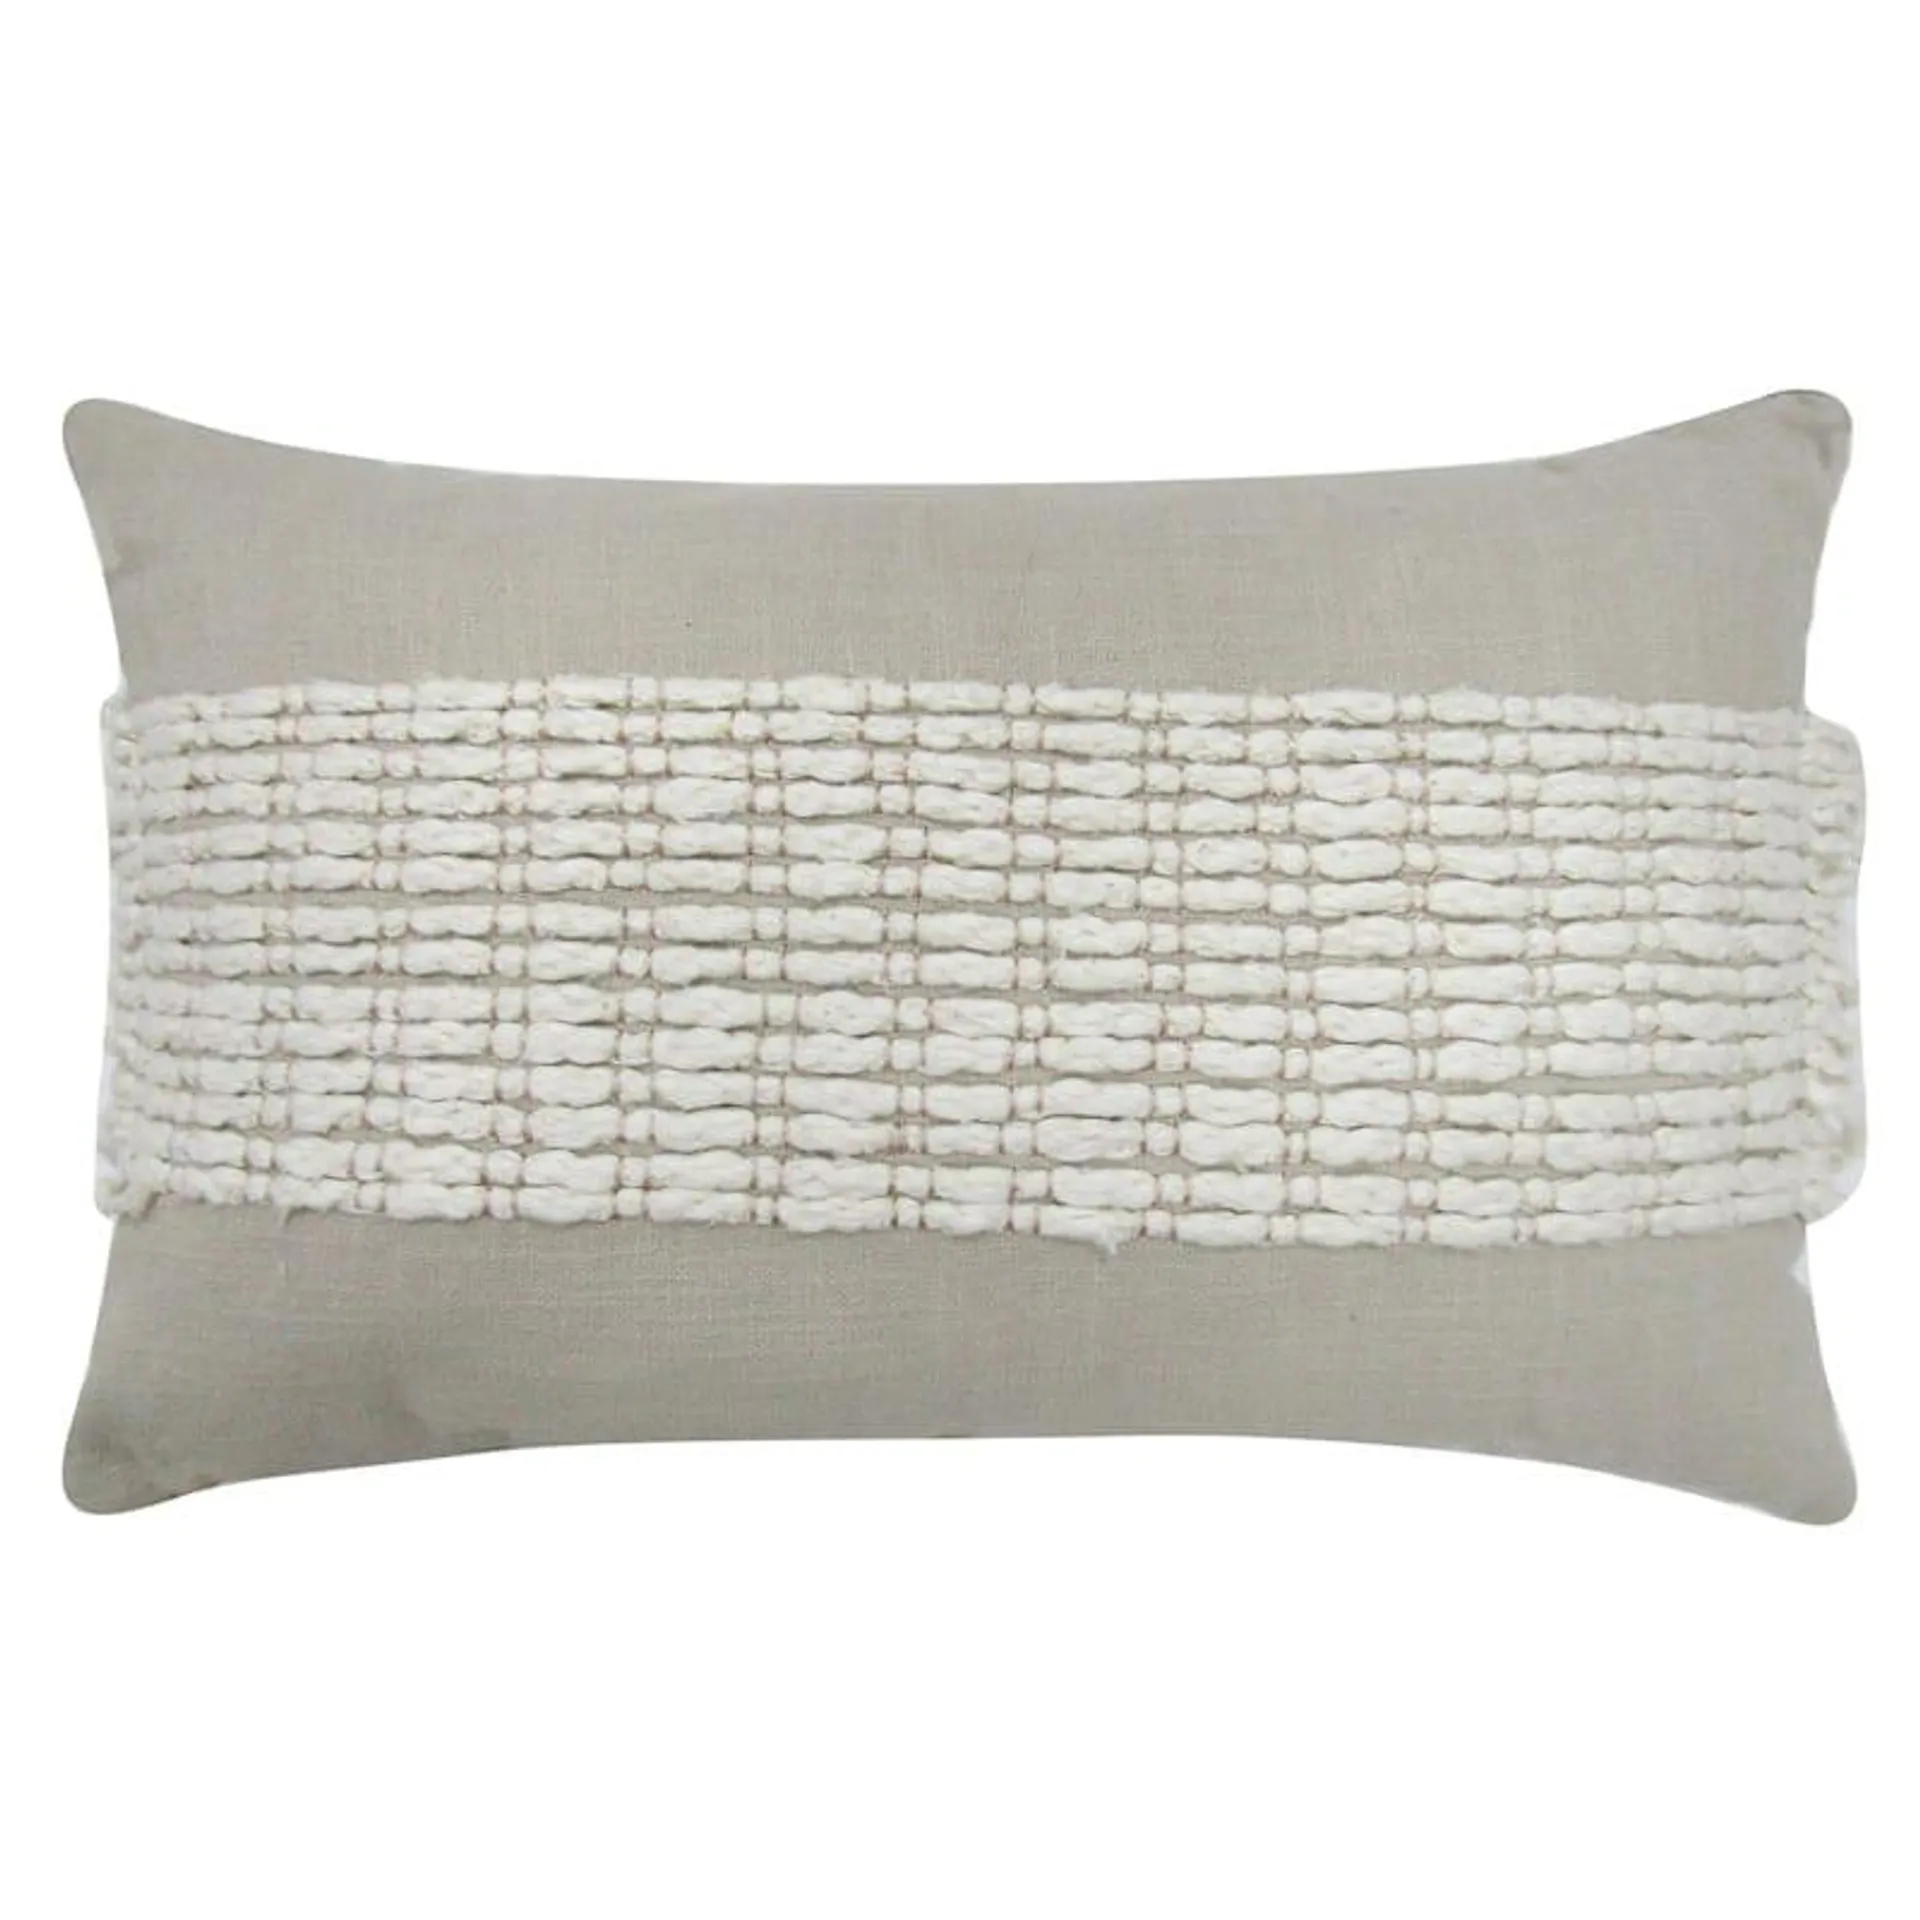 Natural Cord Fringe Woven Oblong Throw Pillow, 14x20